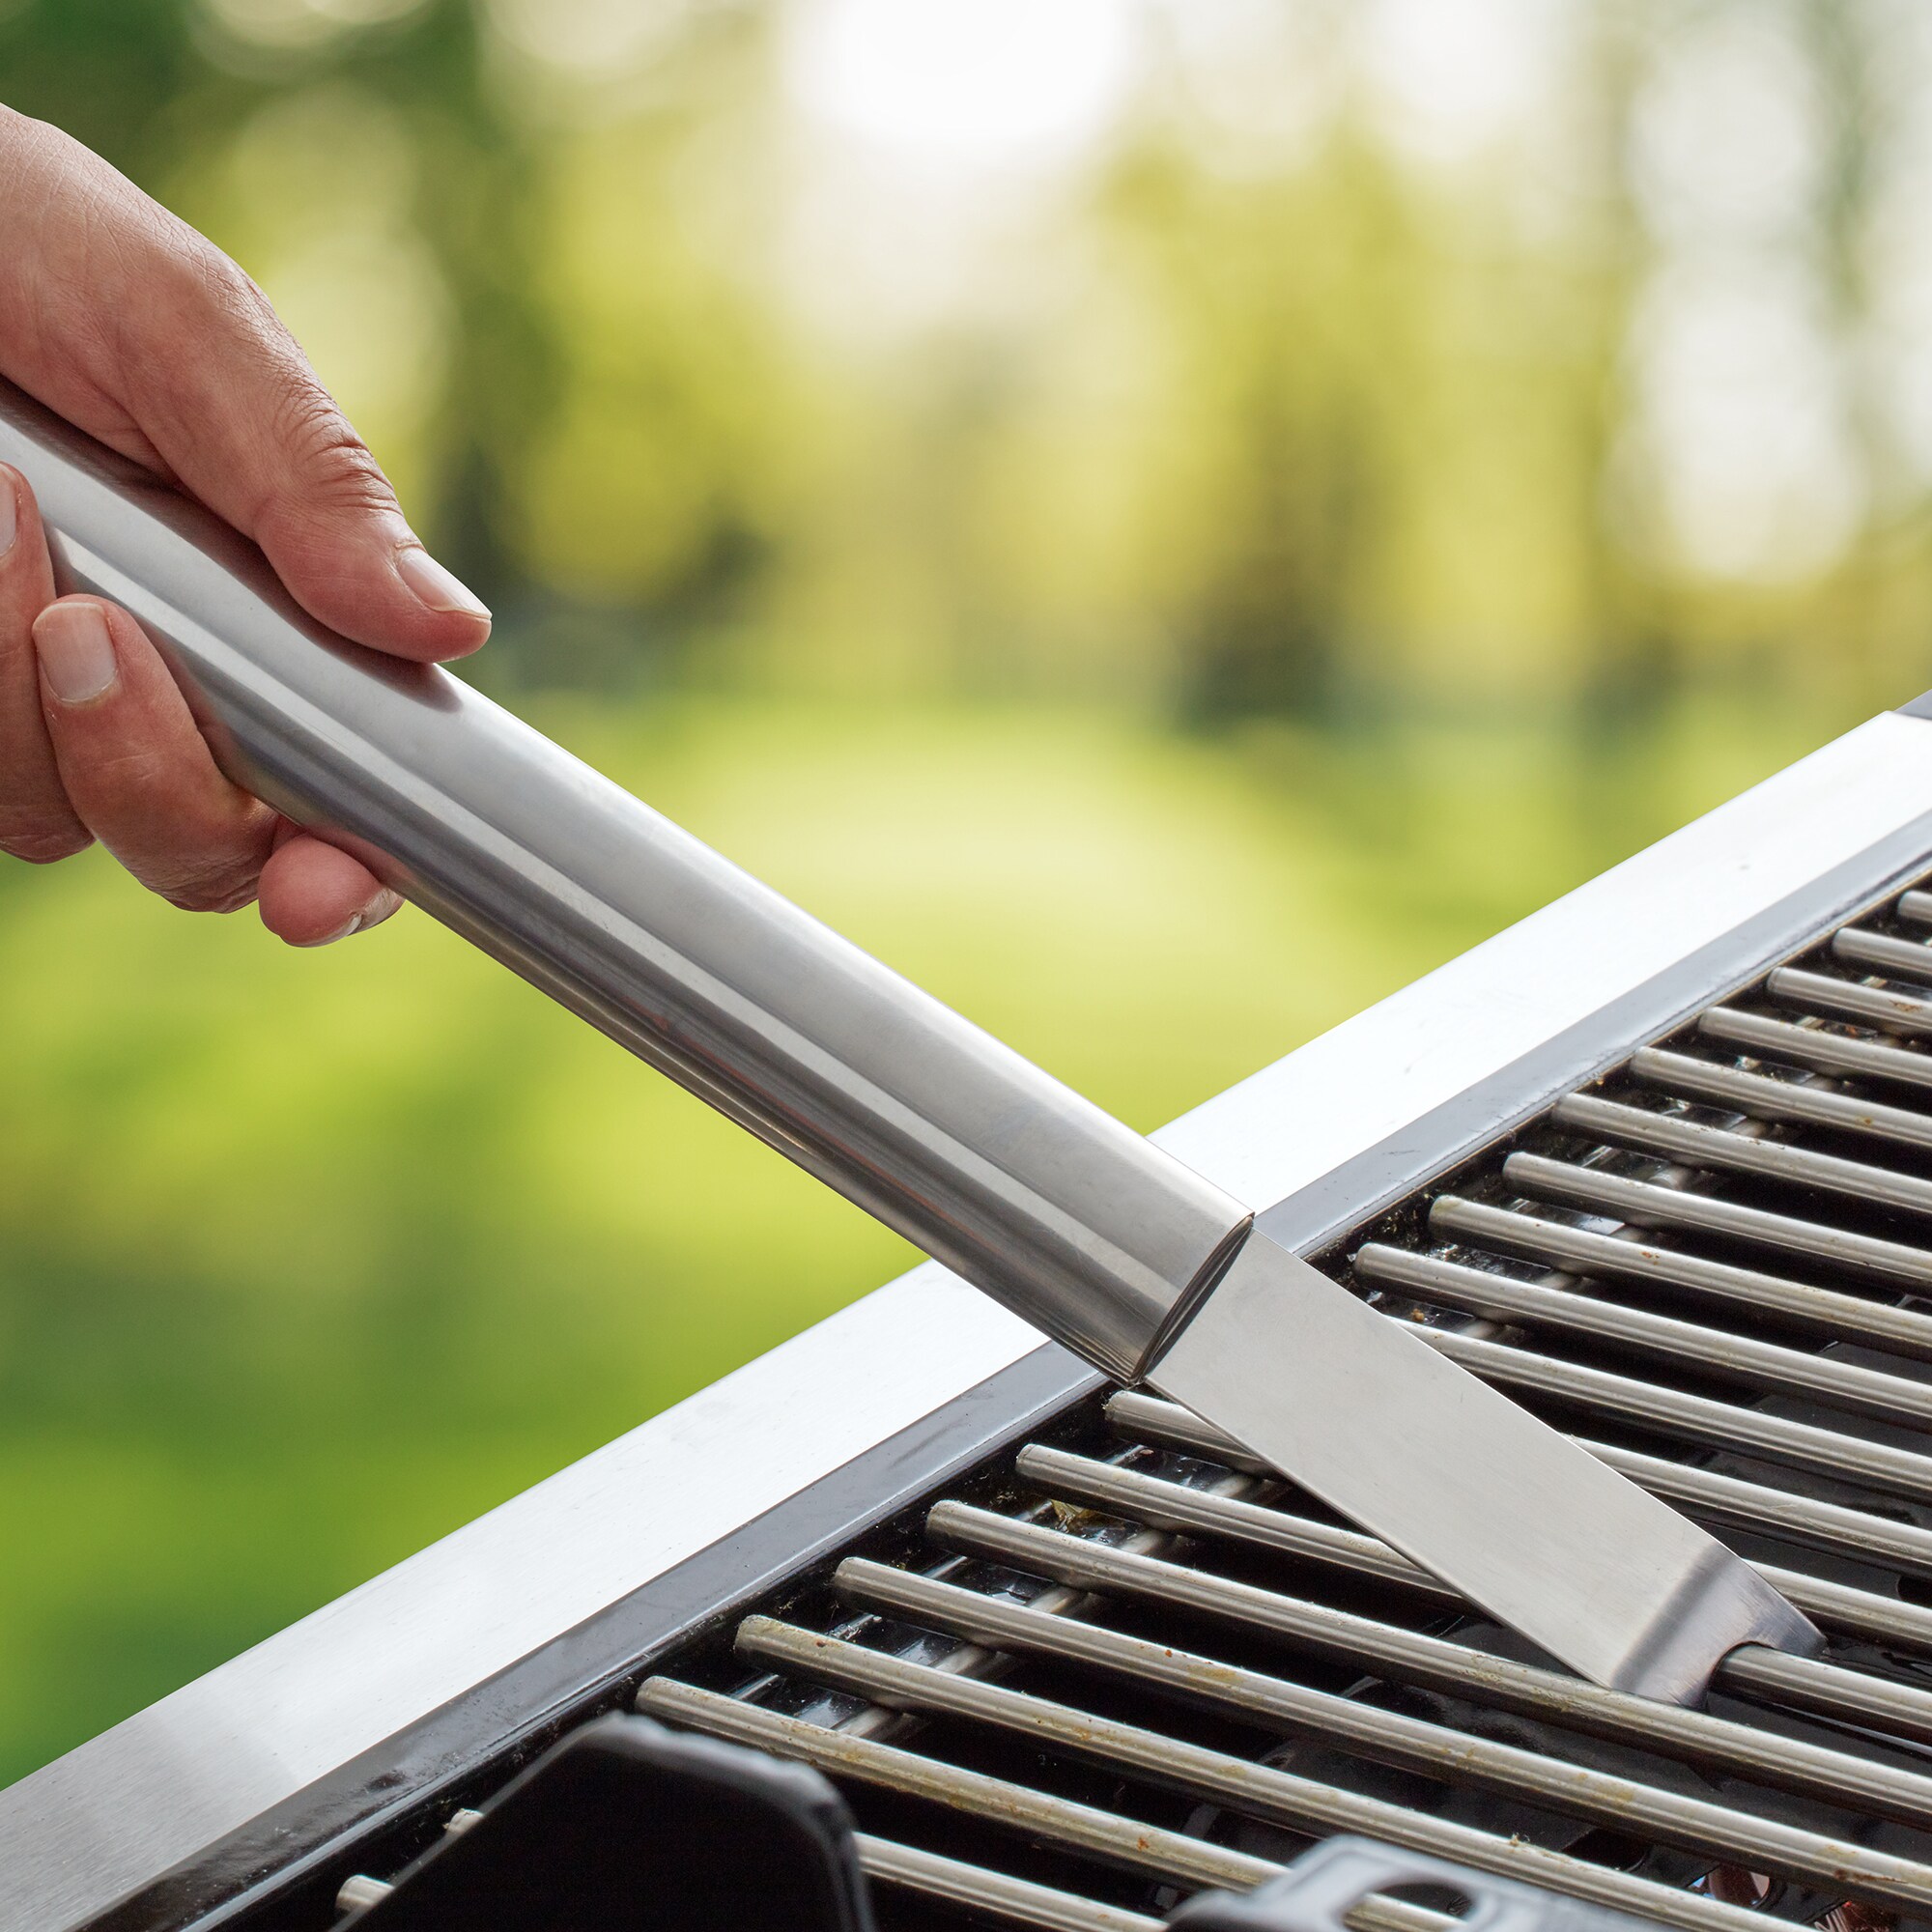 SKUSHOPS BBQ Grill Cleaning Brush Stainless Steel Barbecue Cleaner